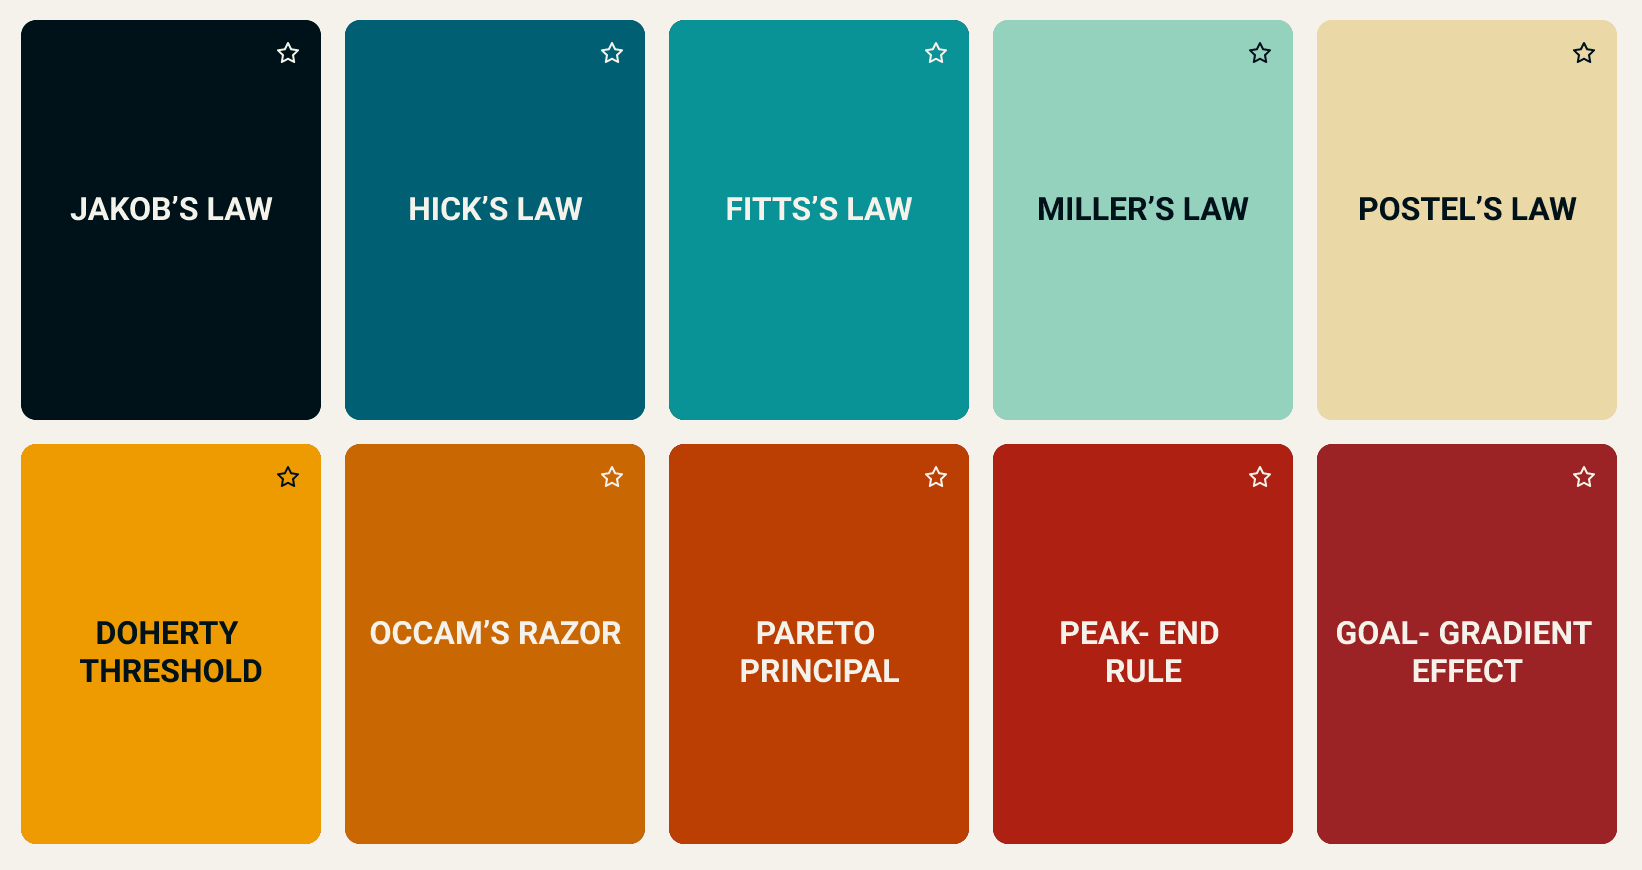 Laws of UX Flipping Flash Cards figma flashcards prototyping responsive design ux laws